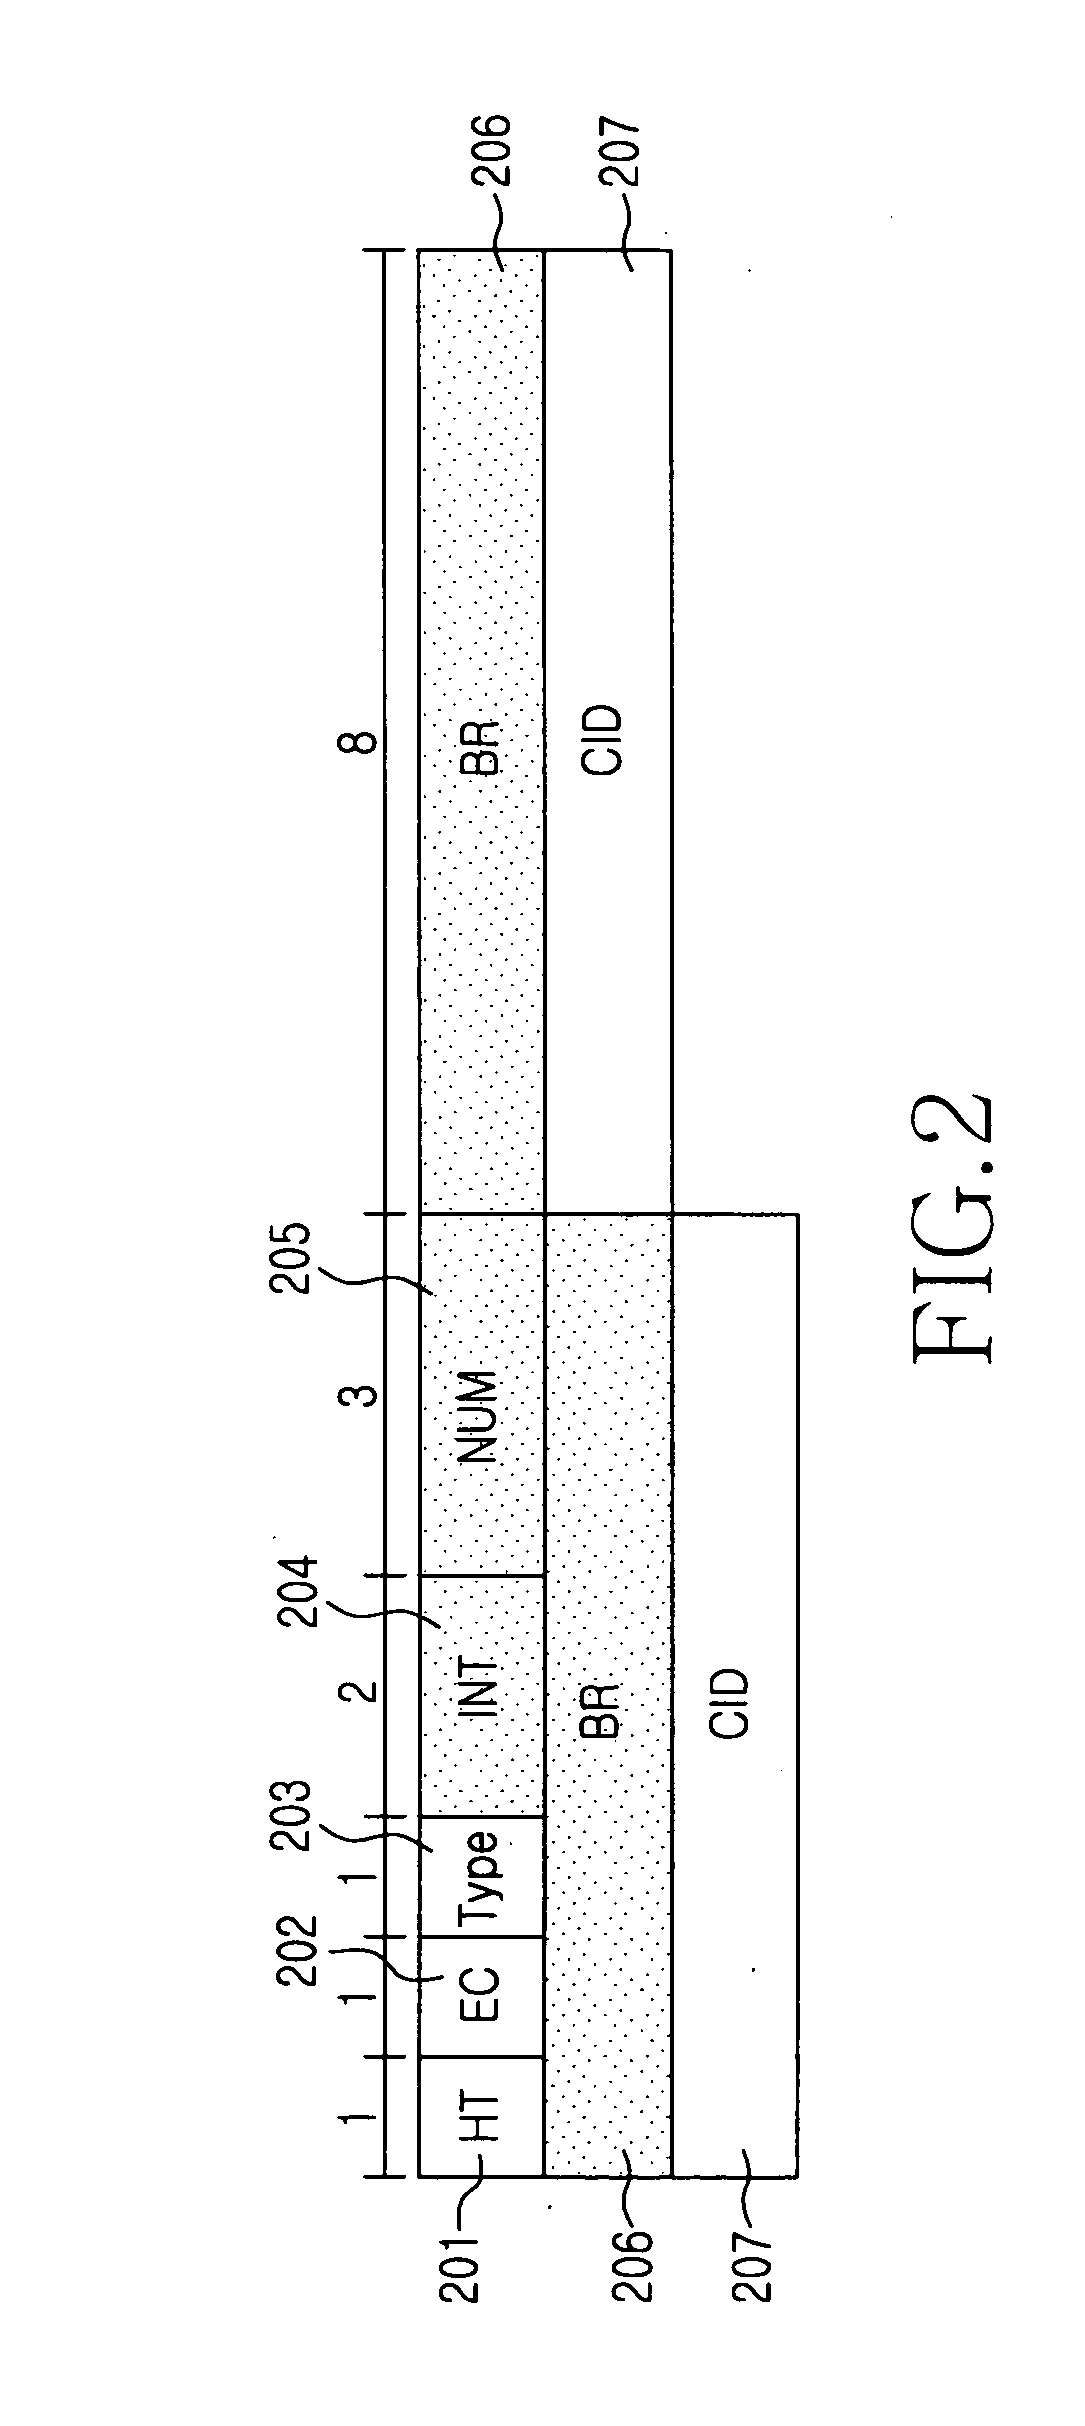 Apparatus and method for bandwidth request in broadband wireless communication system